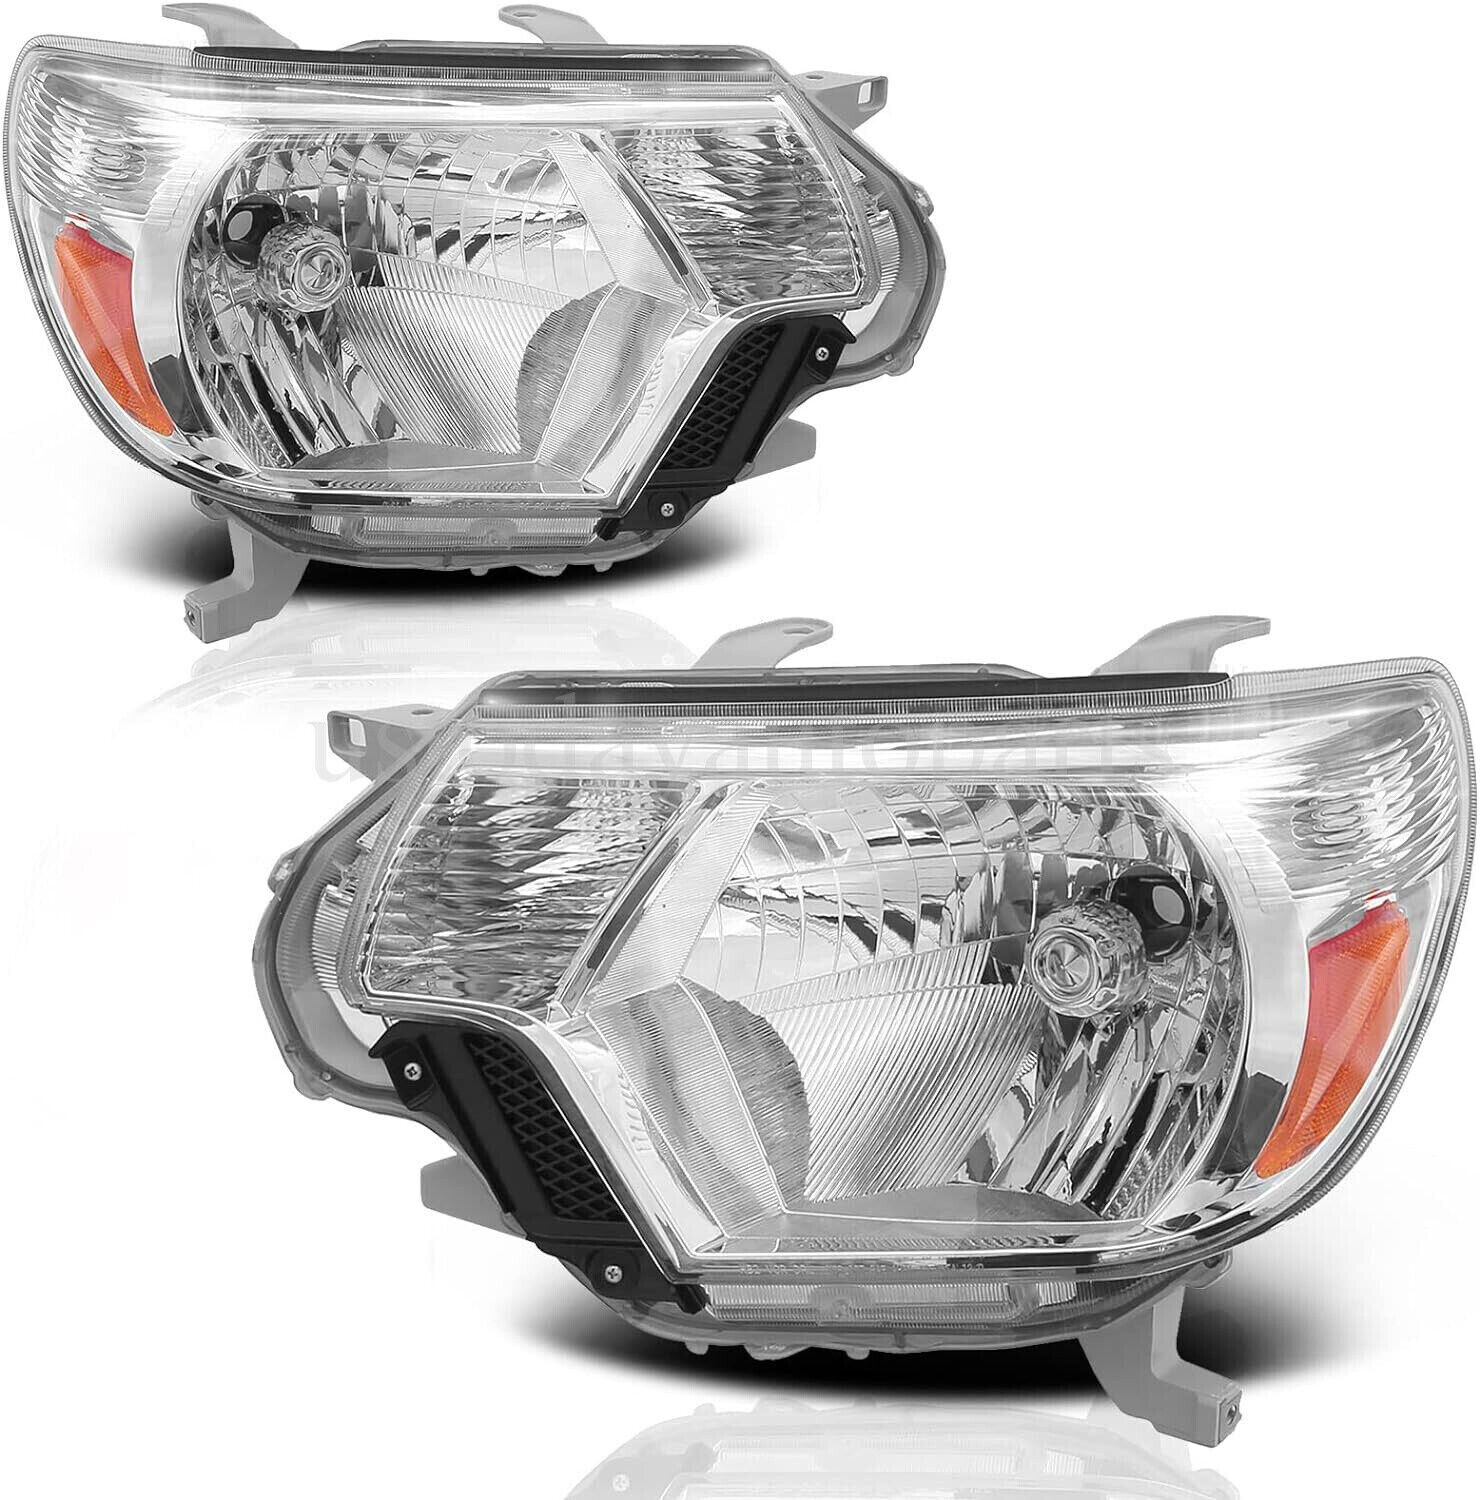 Headlights Pair Fits For 2012 2013 2014 2015 Toyota Tacoma Chrome Housing Lamps